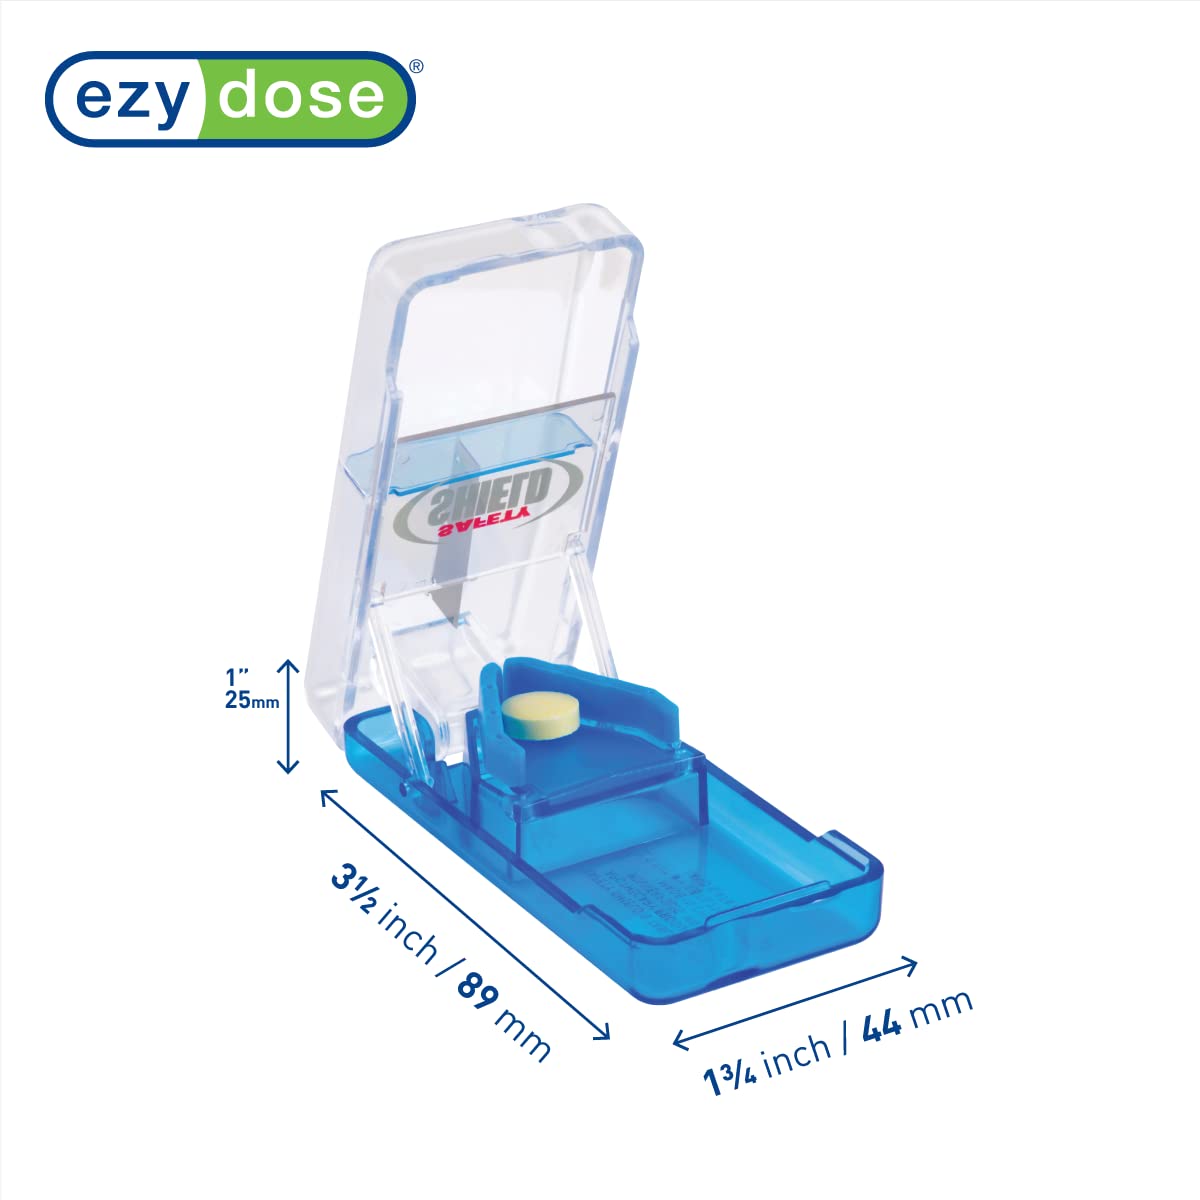 EZY DOSE Ezy Dose Pill Cutter with Safety Shield │Safely Cut Pills and Vitamins │Pill Splitter , Colors may vary